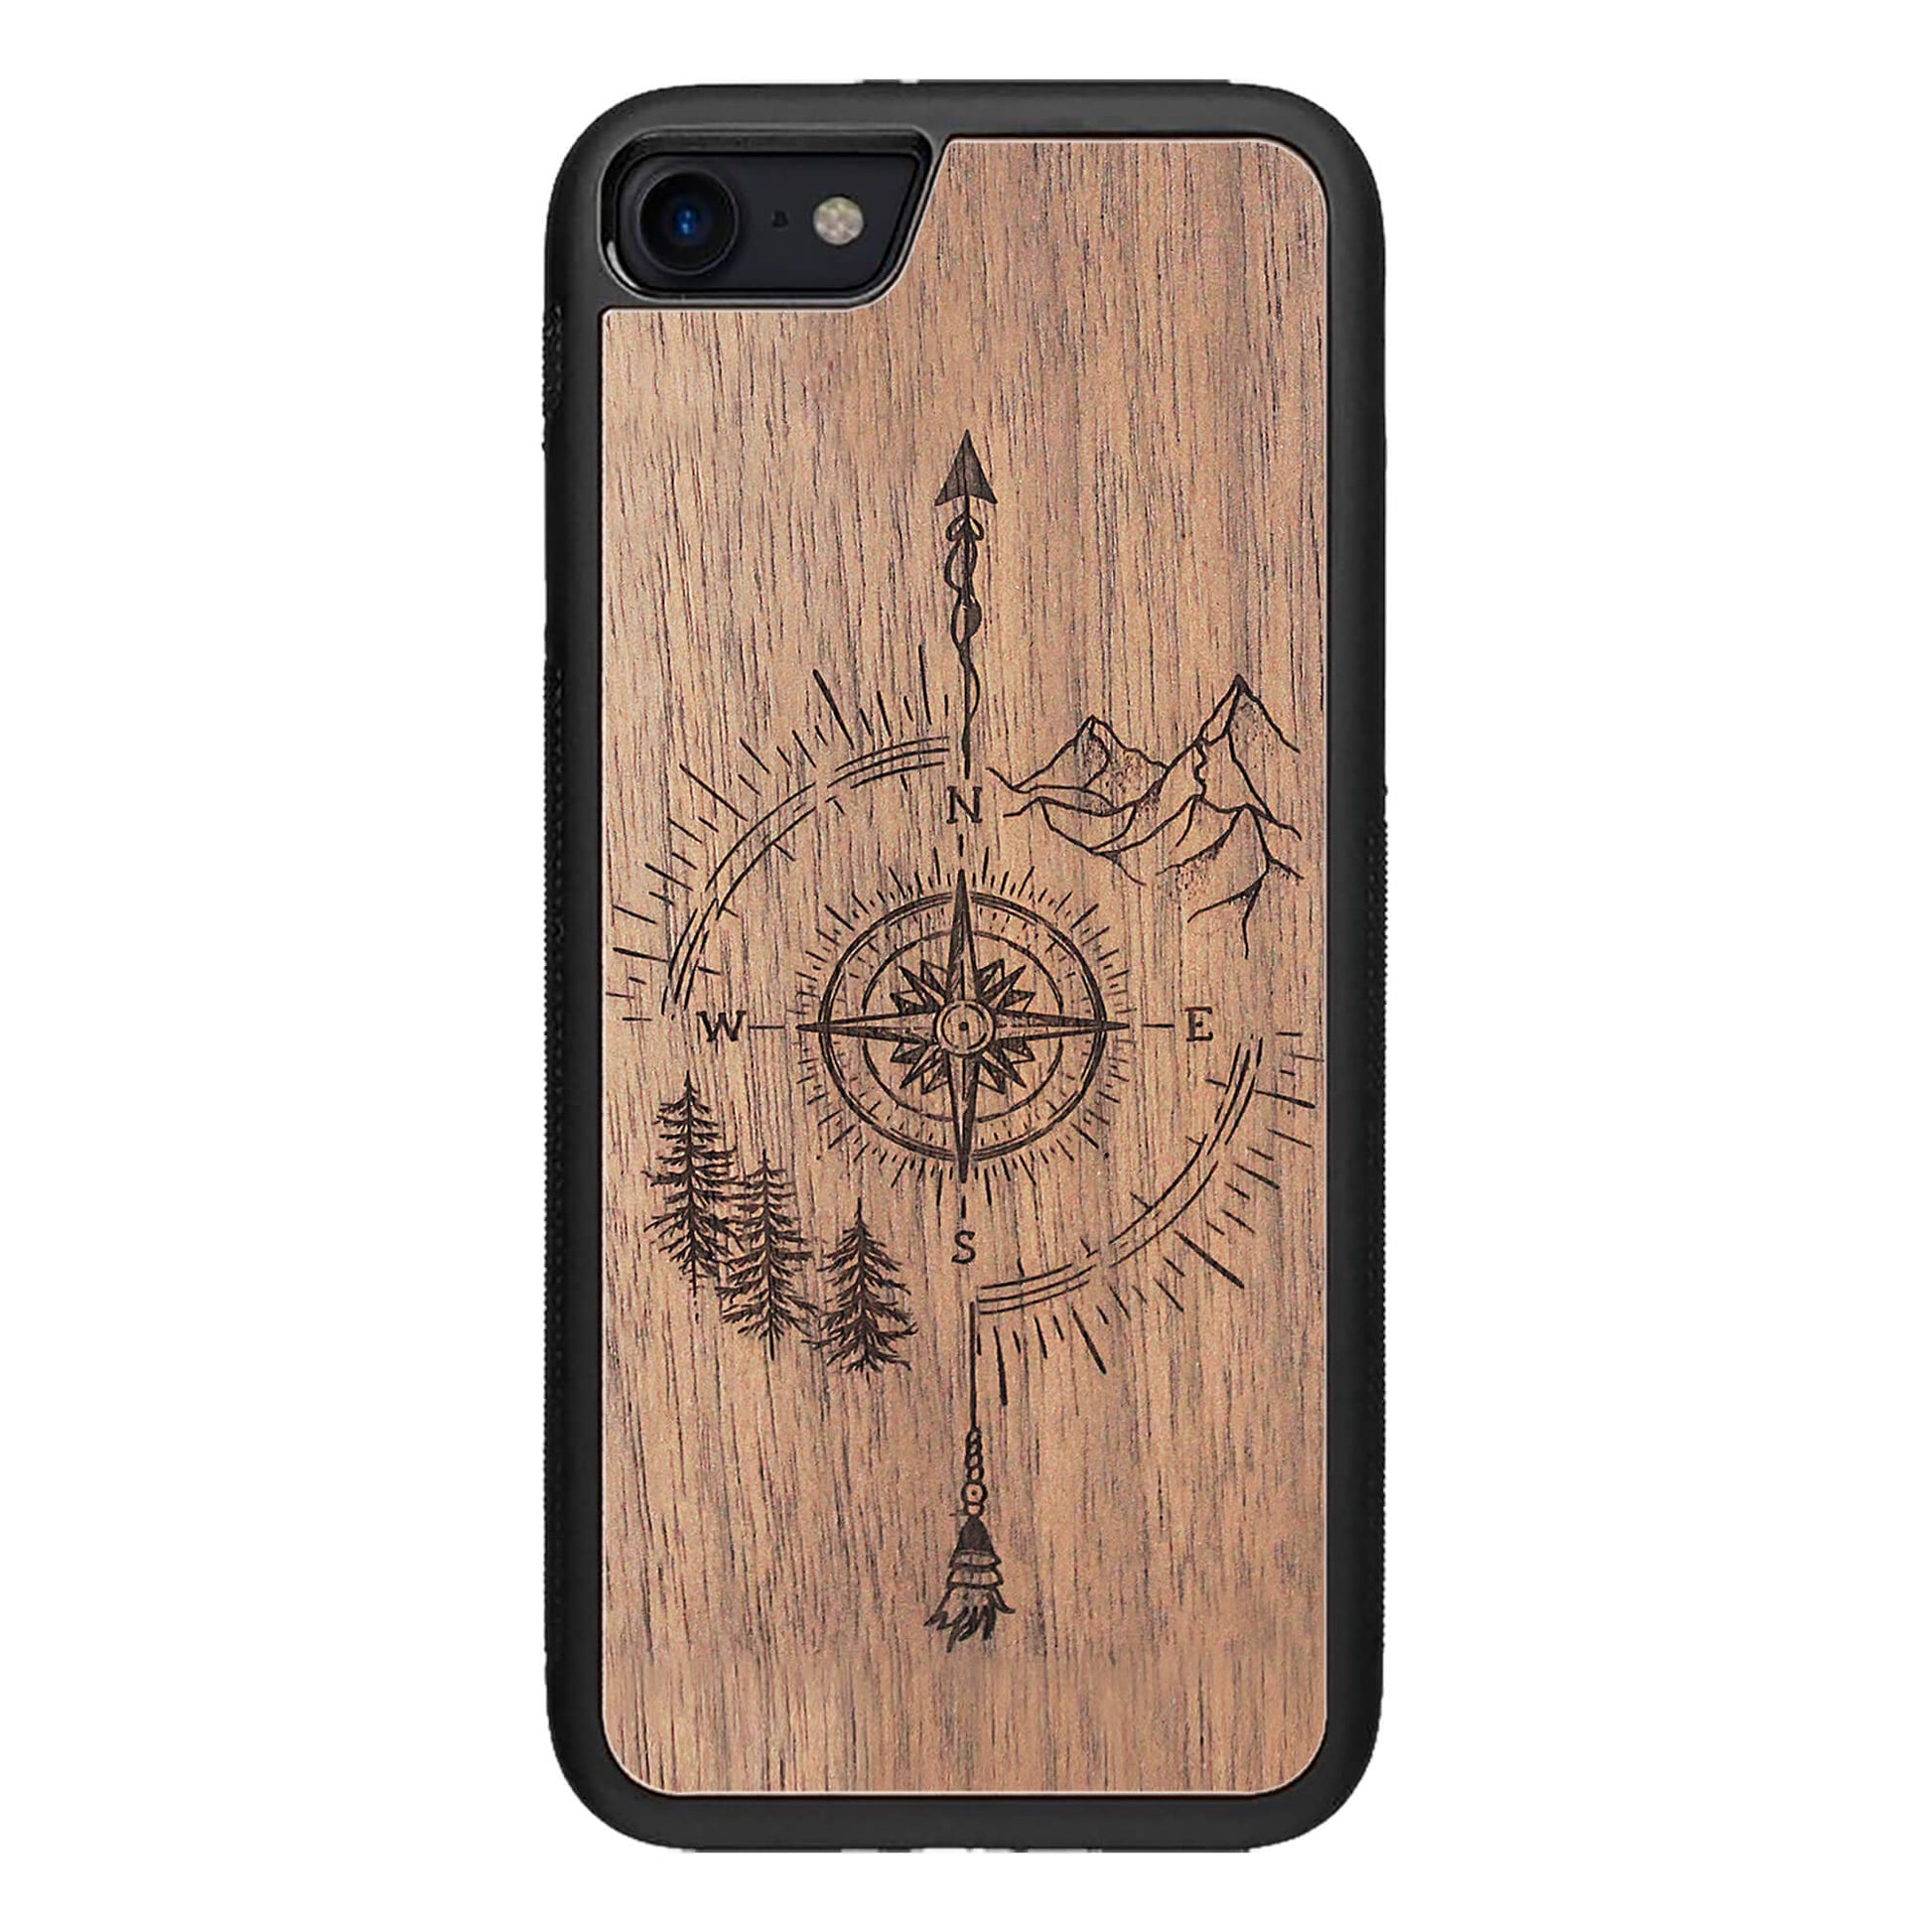 Wooden Case for iPhone SE 2 generation case Just Go